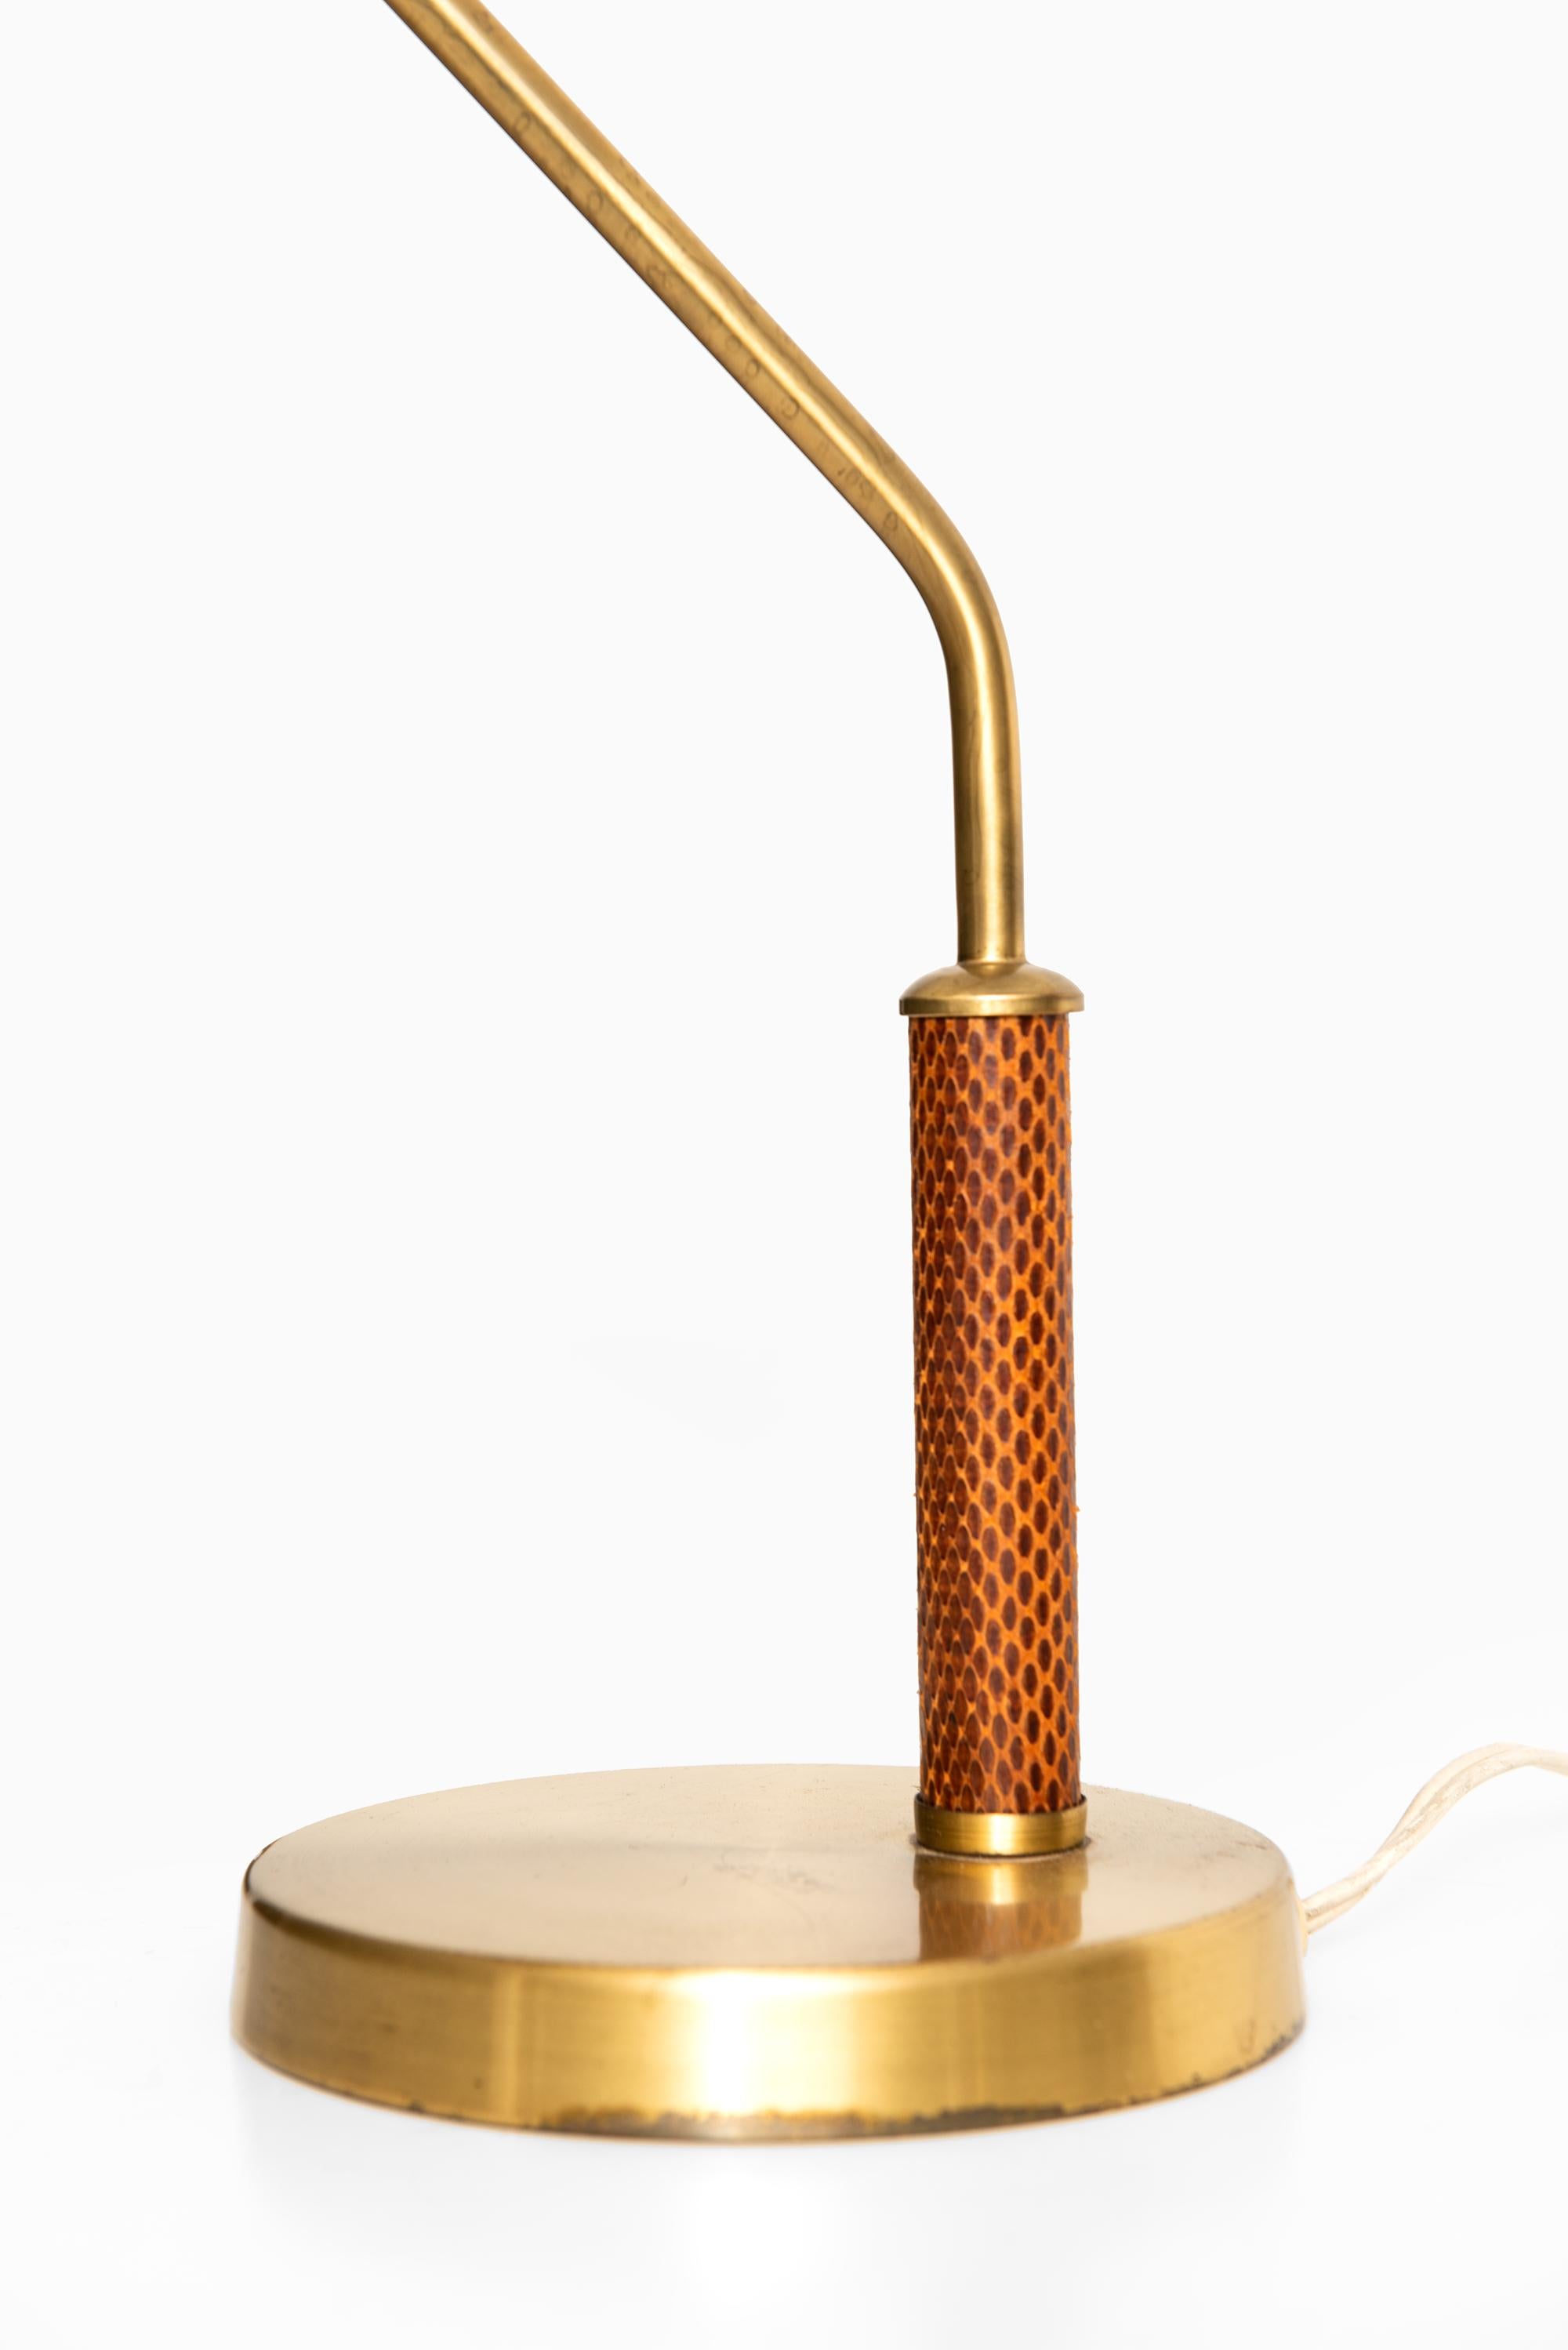 Rare table lamp. Produced by AB E. Hansson & Co in Malmö, Sweden.